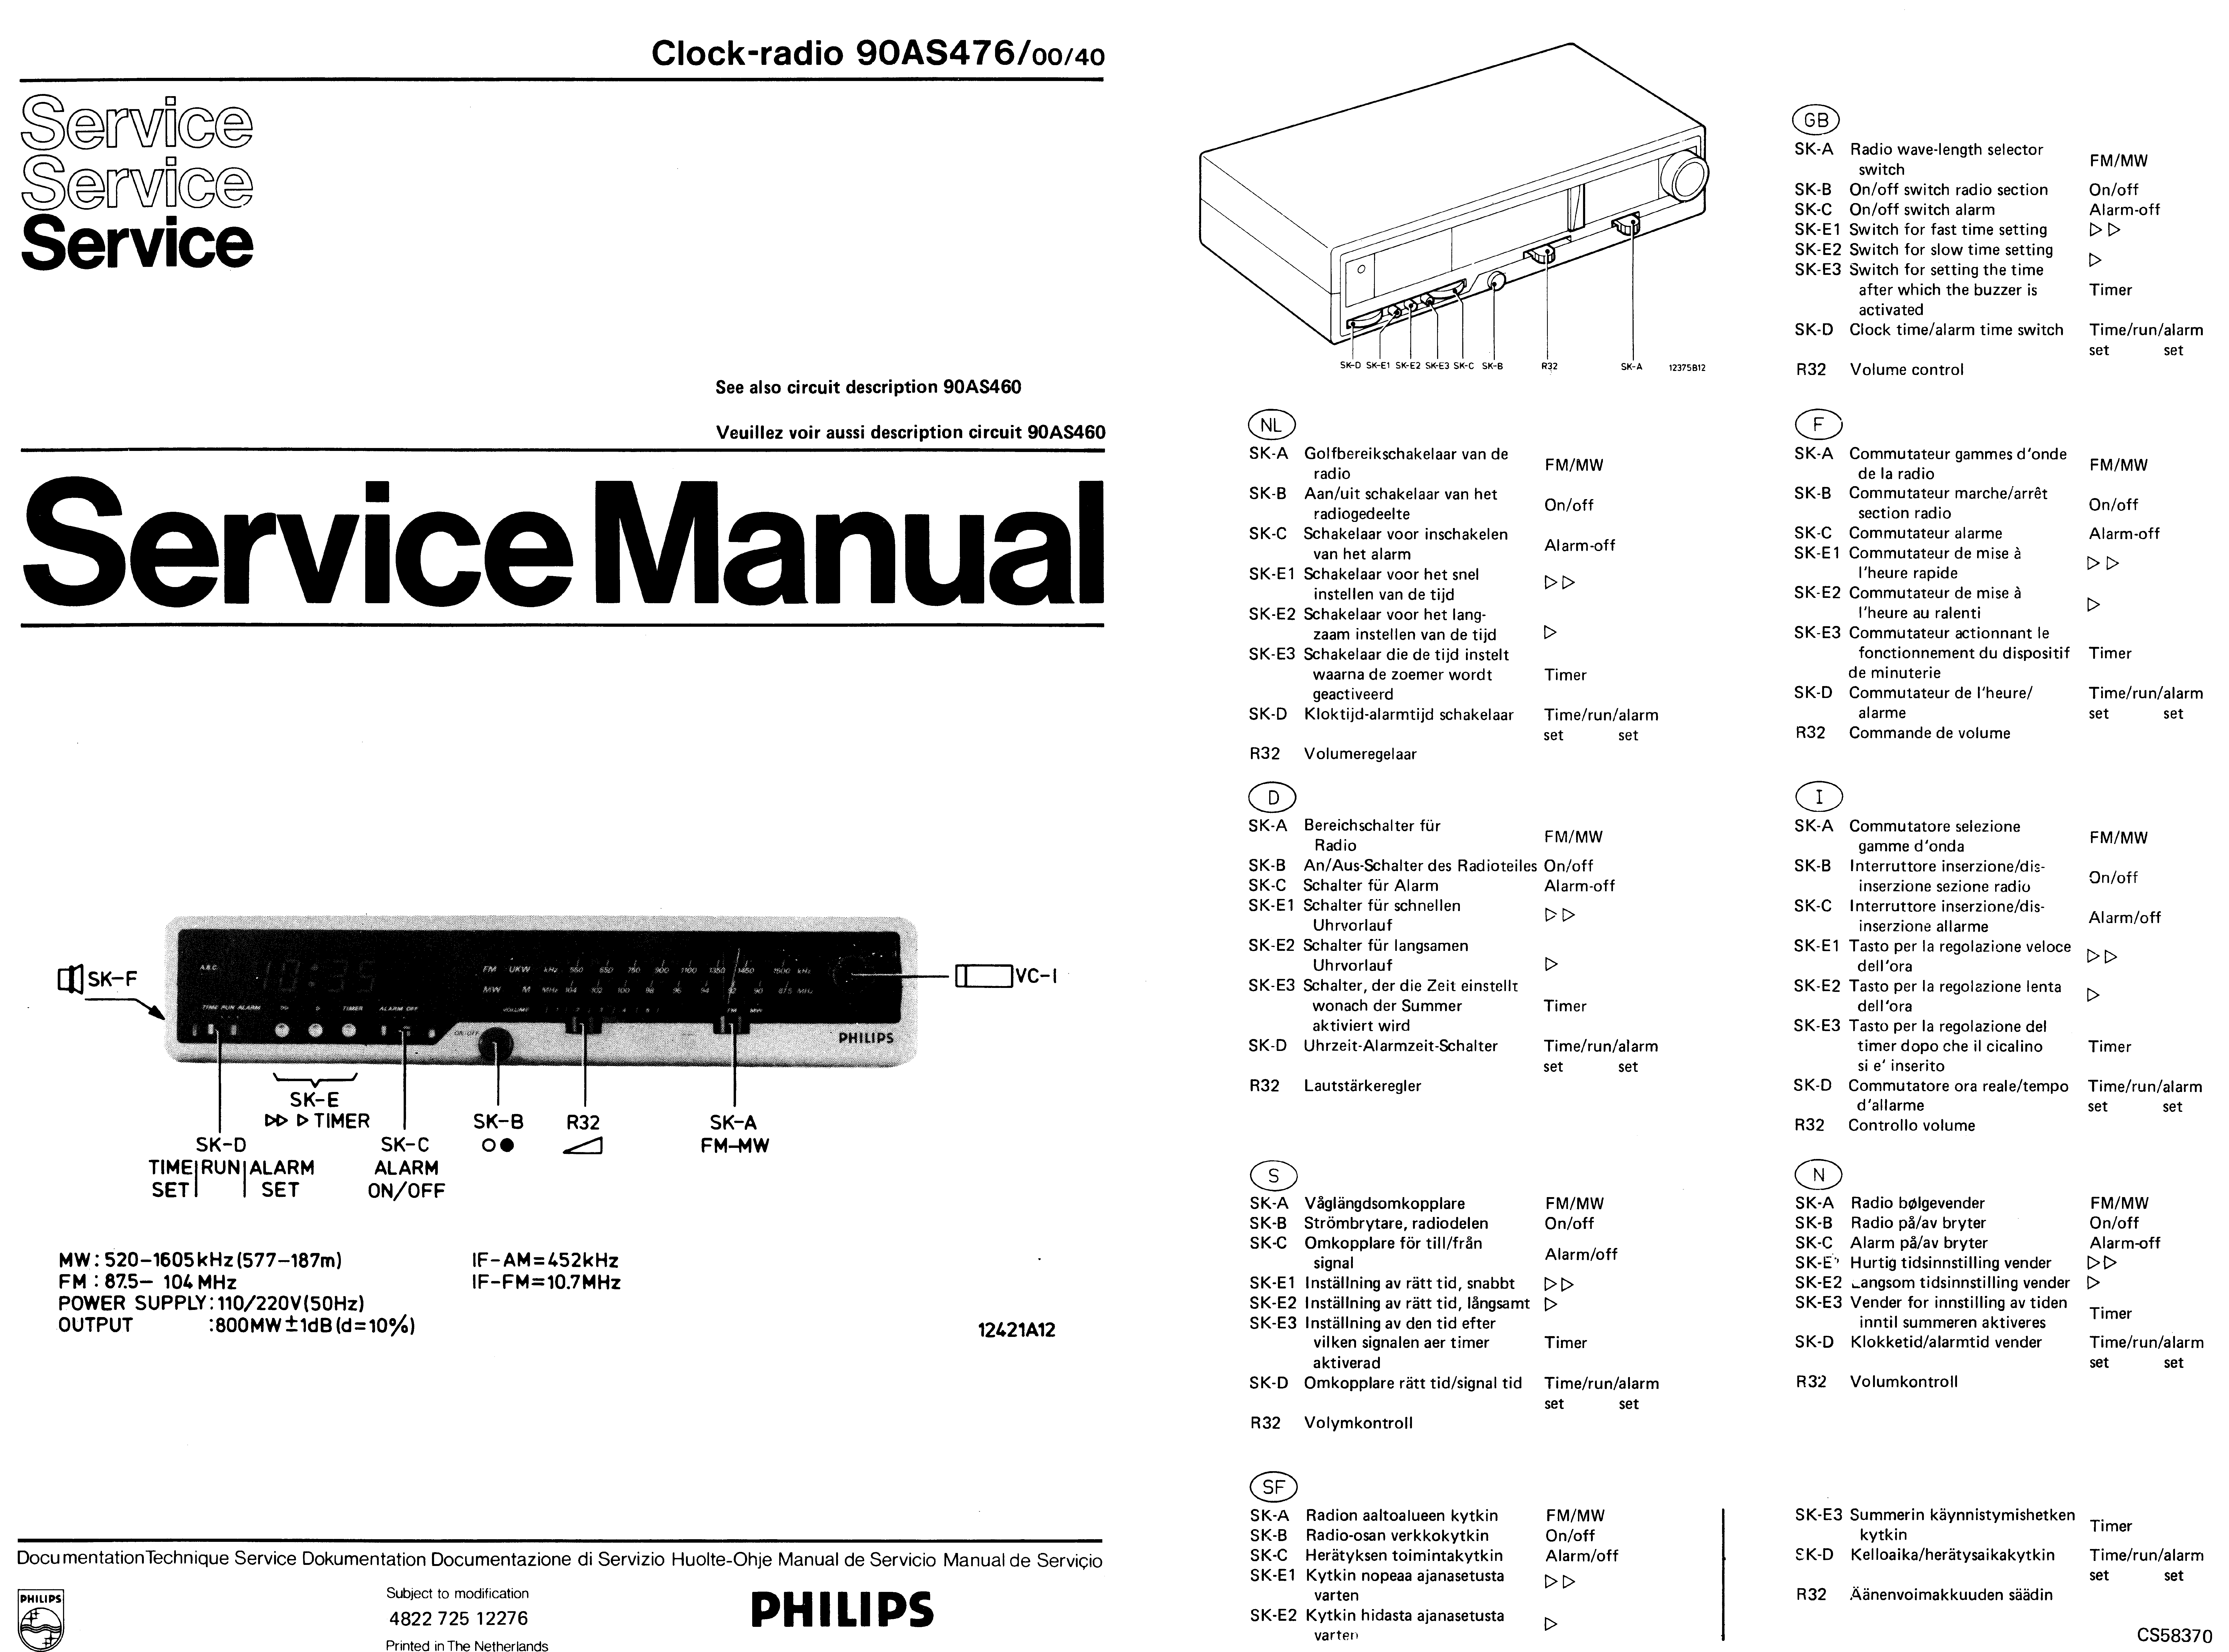 PHILIPS CLOCK-RADIO 90AS476 SM service manual (1st page)